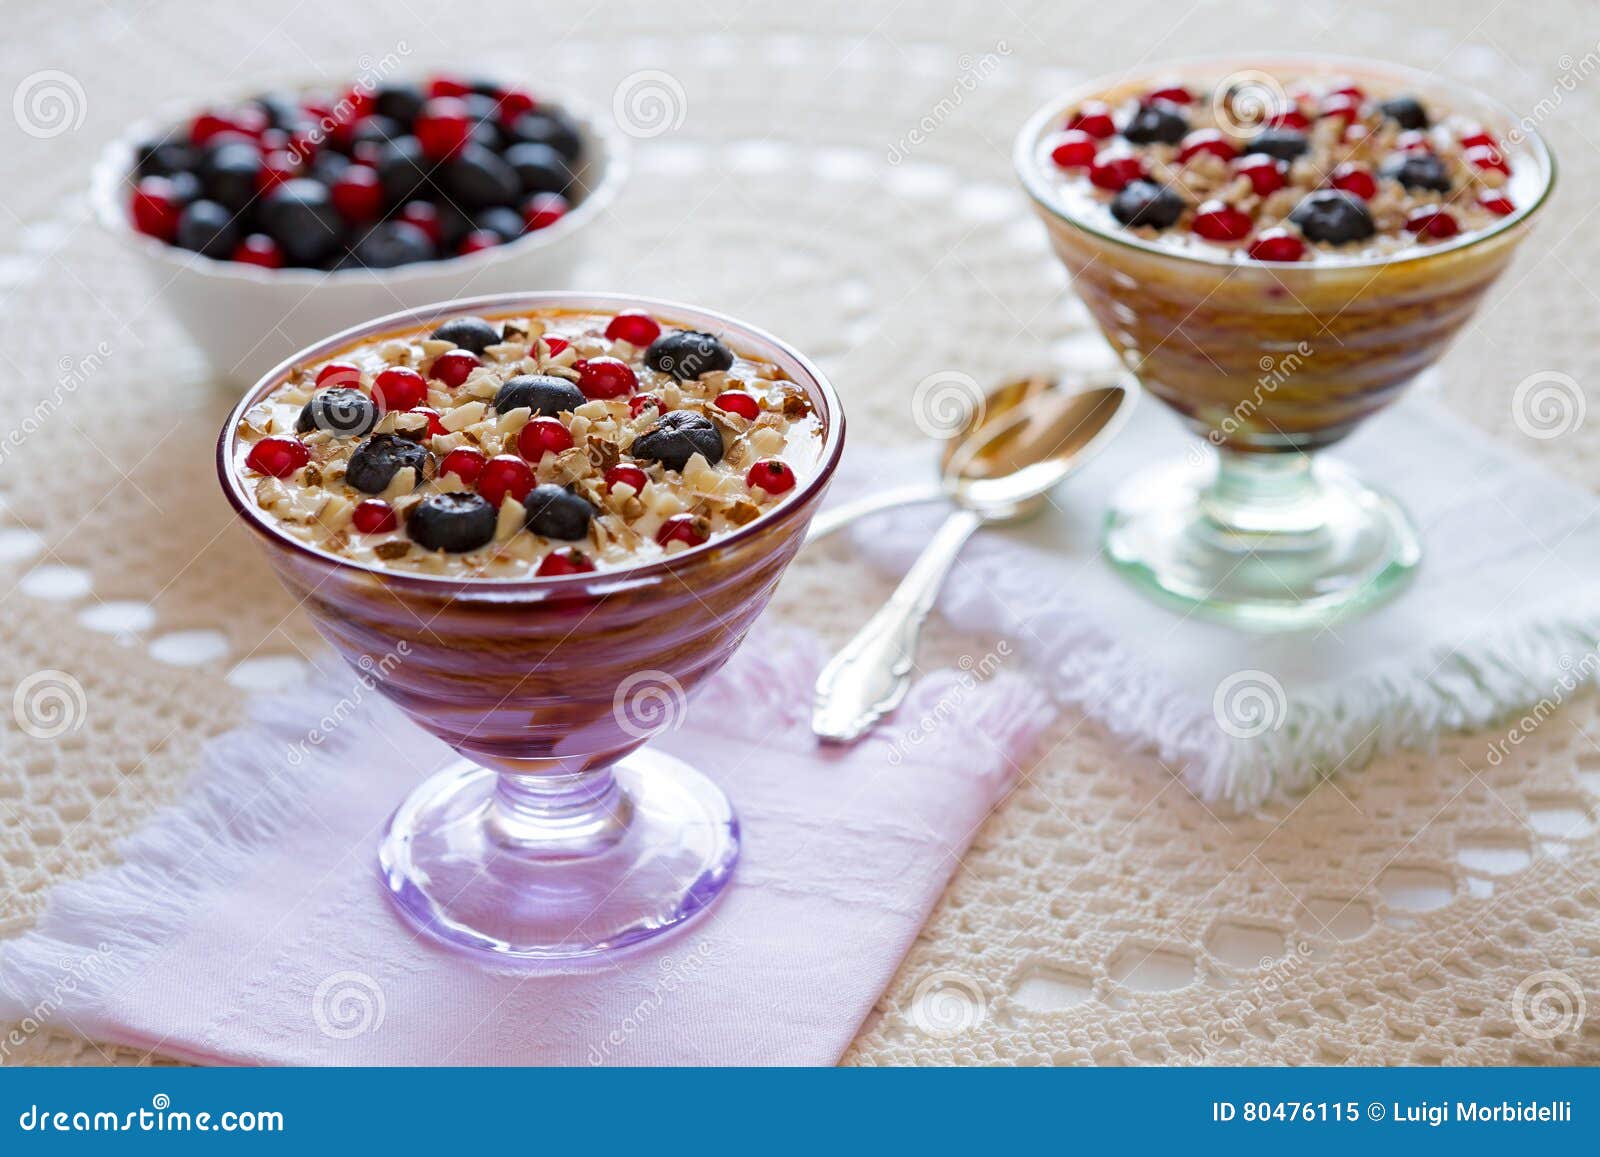 Two Yogurt Dessert with Berries and Almonds Stock Image - Image of ...